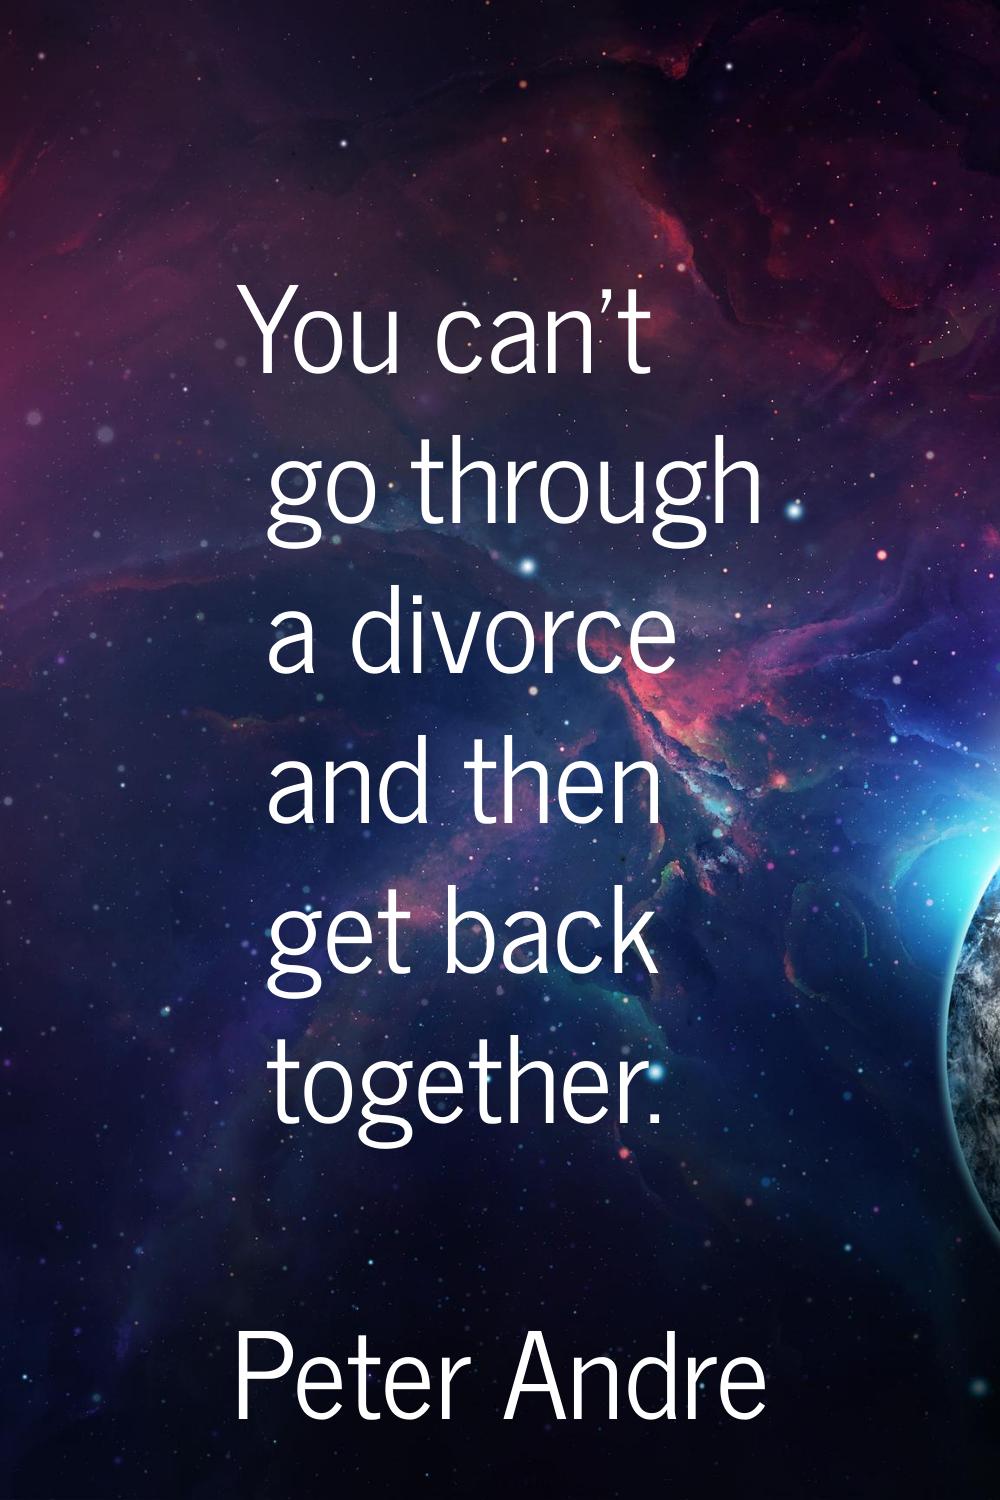 You can't go through a divorce and then get back together.